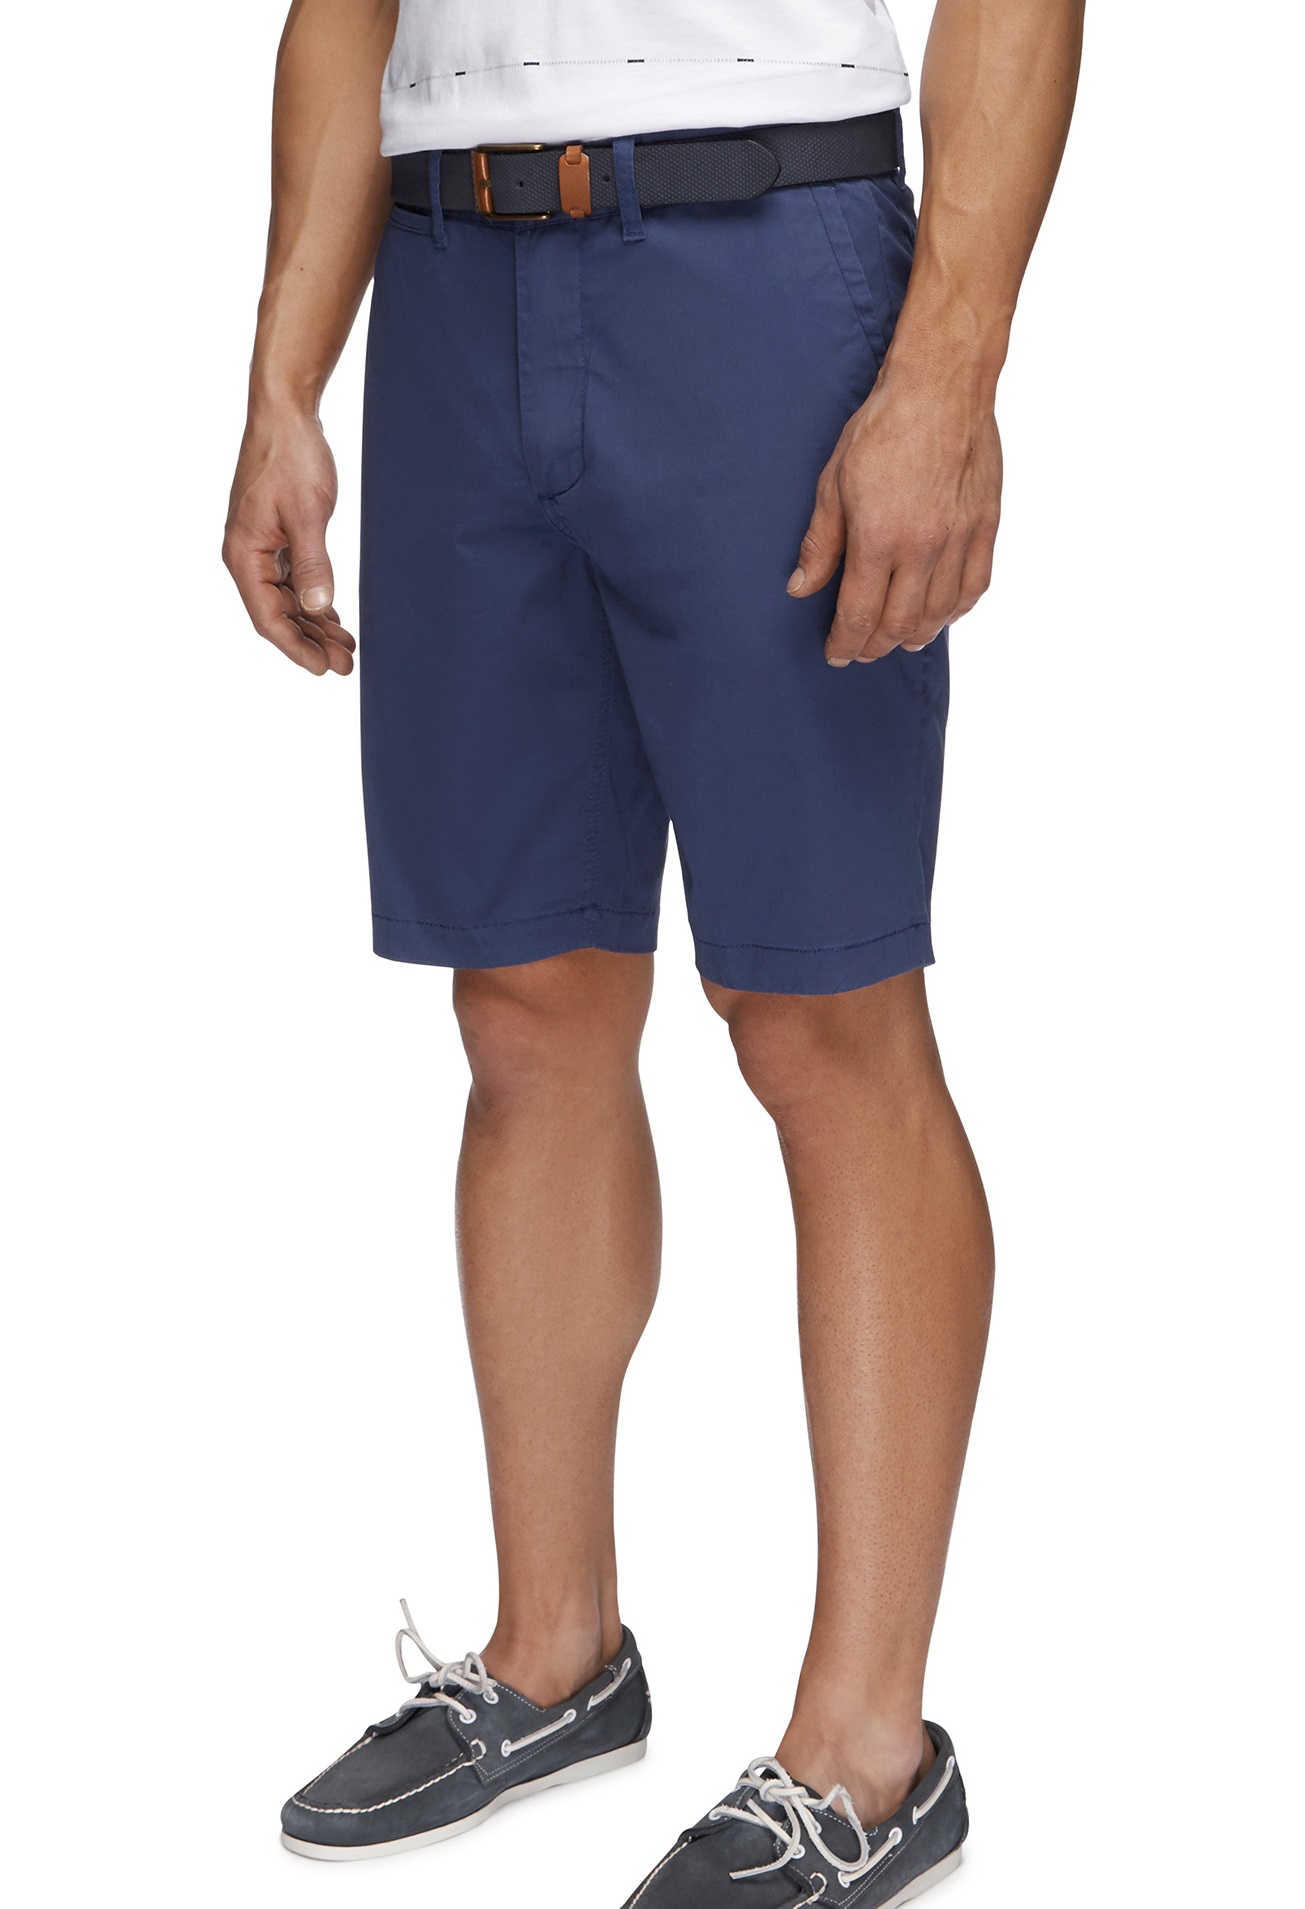 City Club Chino Shorts Cotton Stretch Modern Fit Buy Online